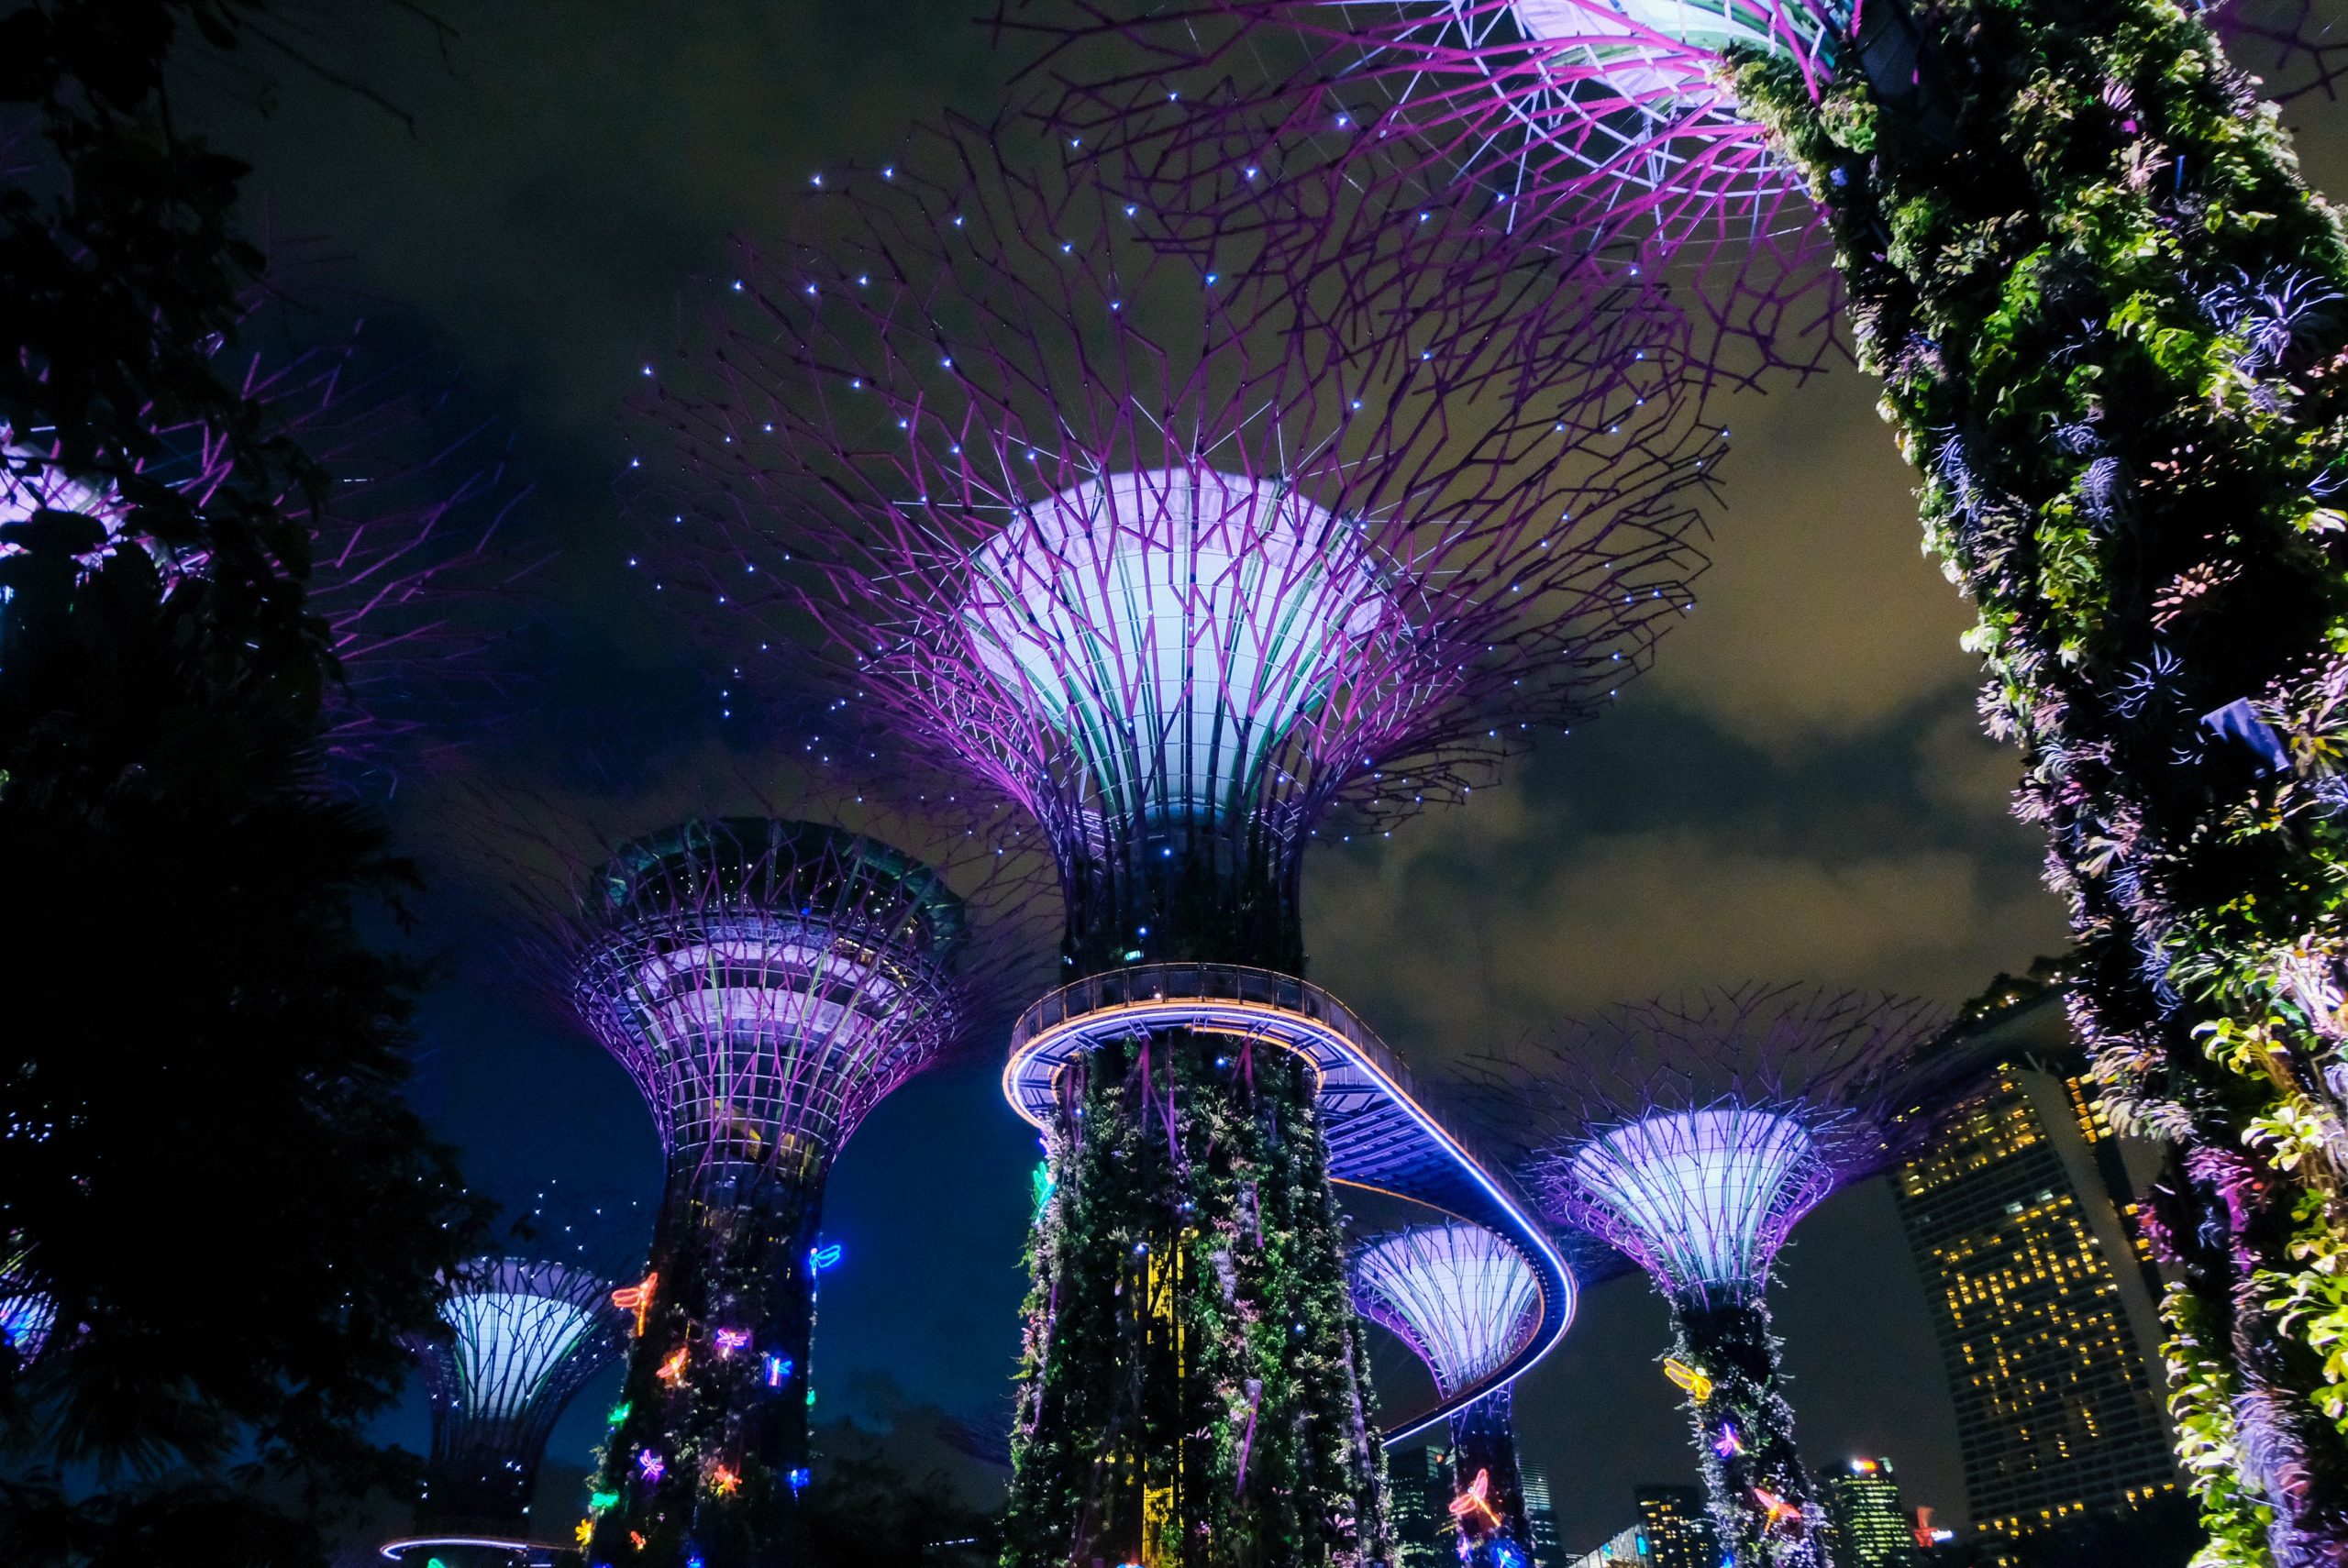 Supertree Grove Singapore makes it different